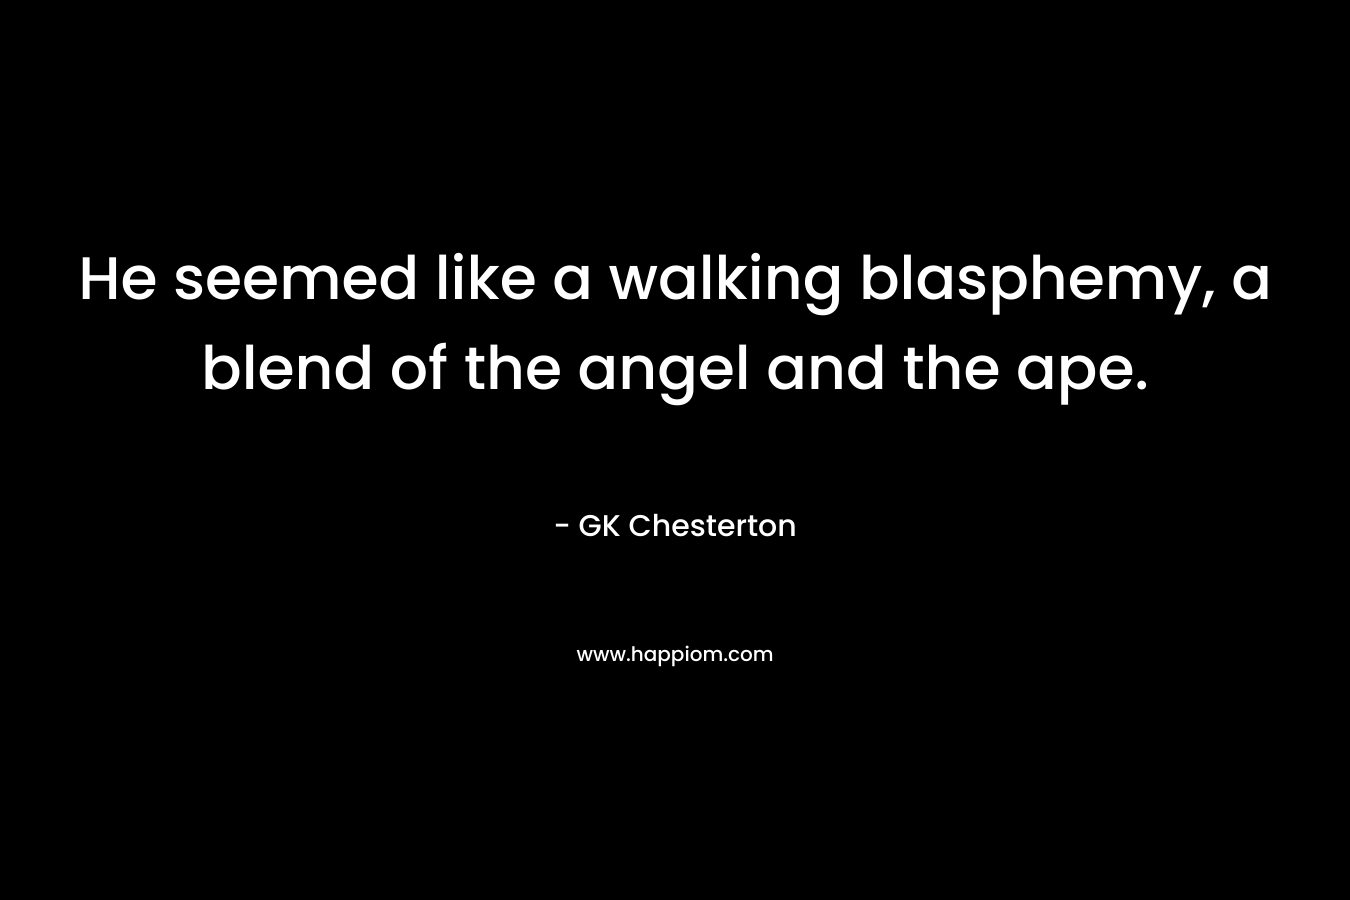 He seemed like a walking blasphemy, a blend of the angel and the ape. – GK Chesterton